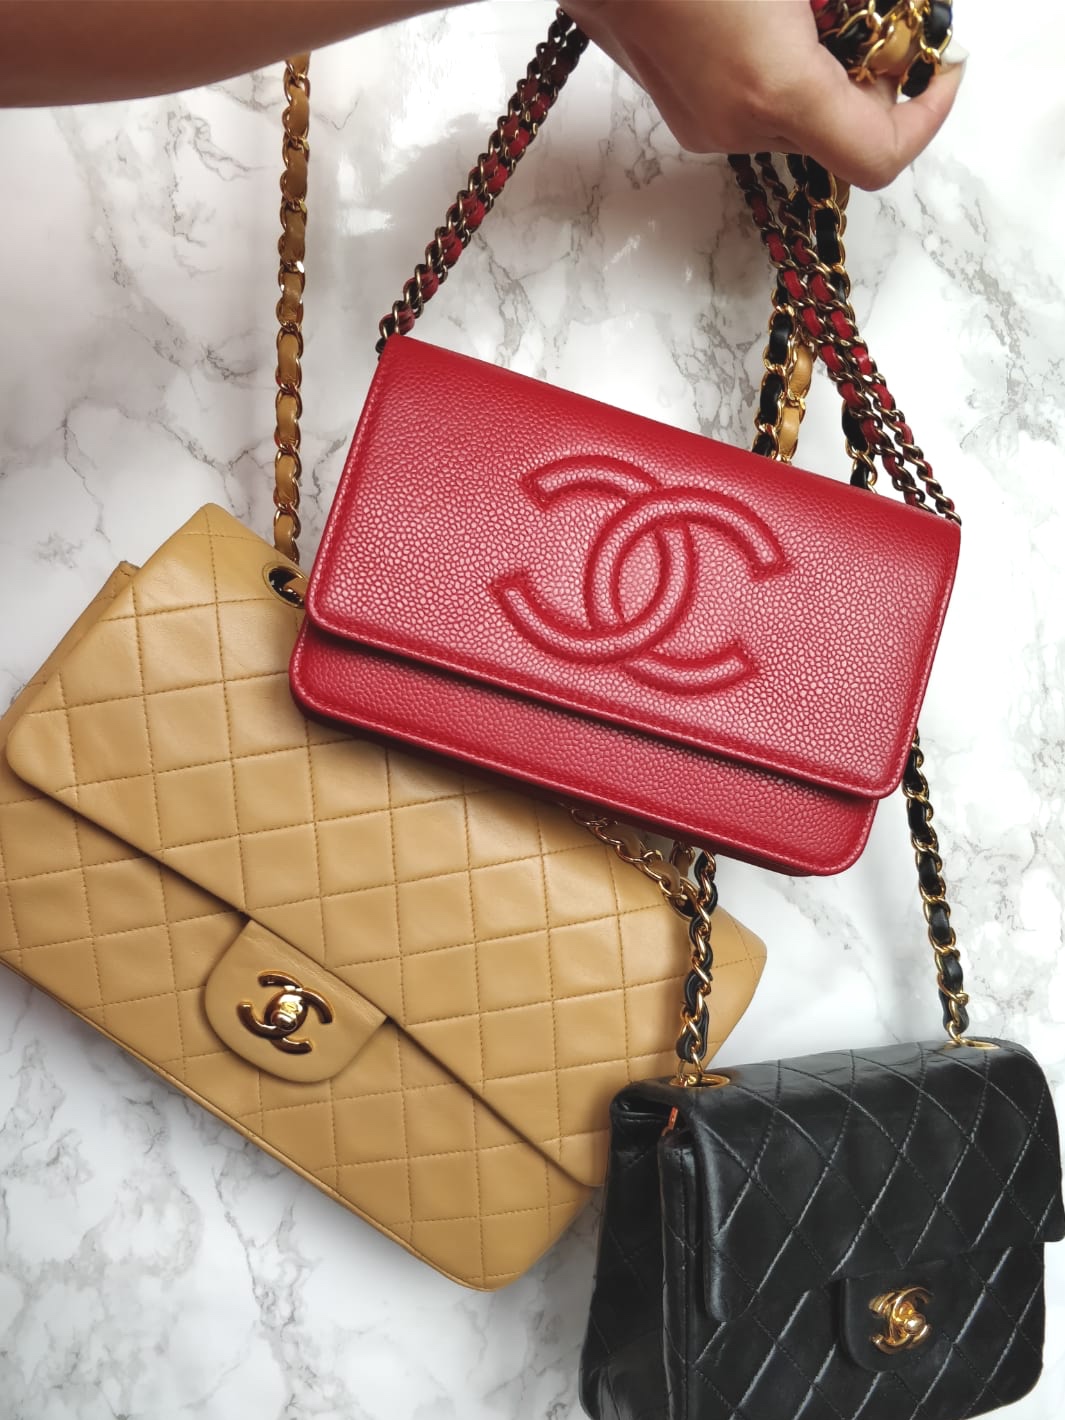 Chanel Small Trendy CC Review - My thoughts so far, wear and tear